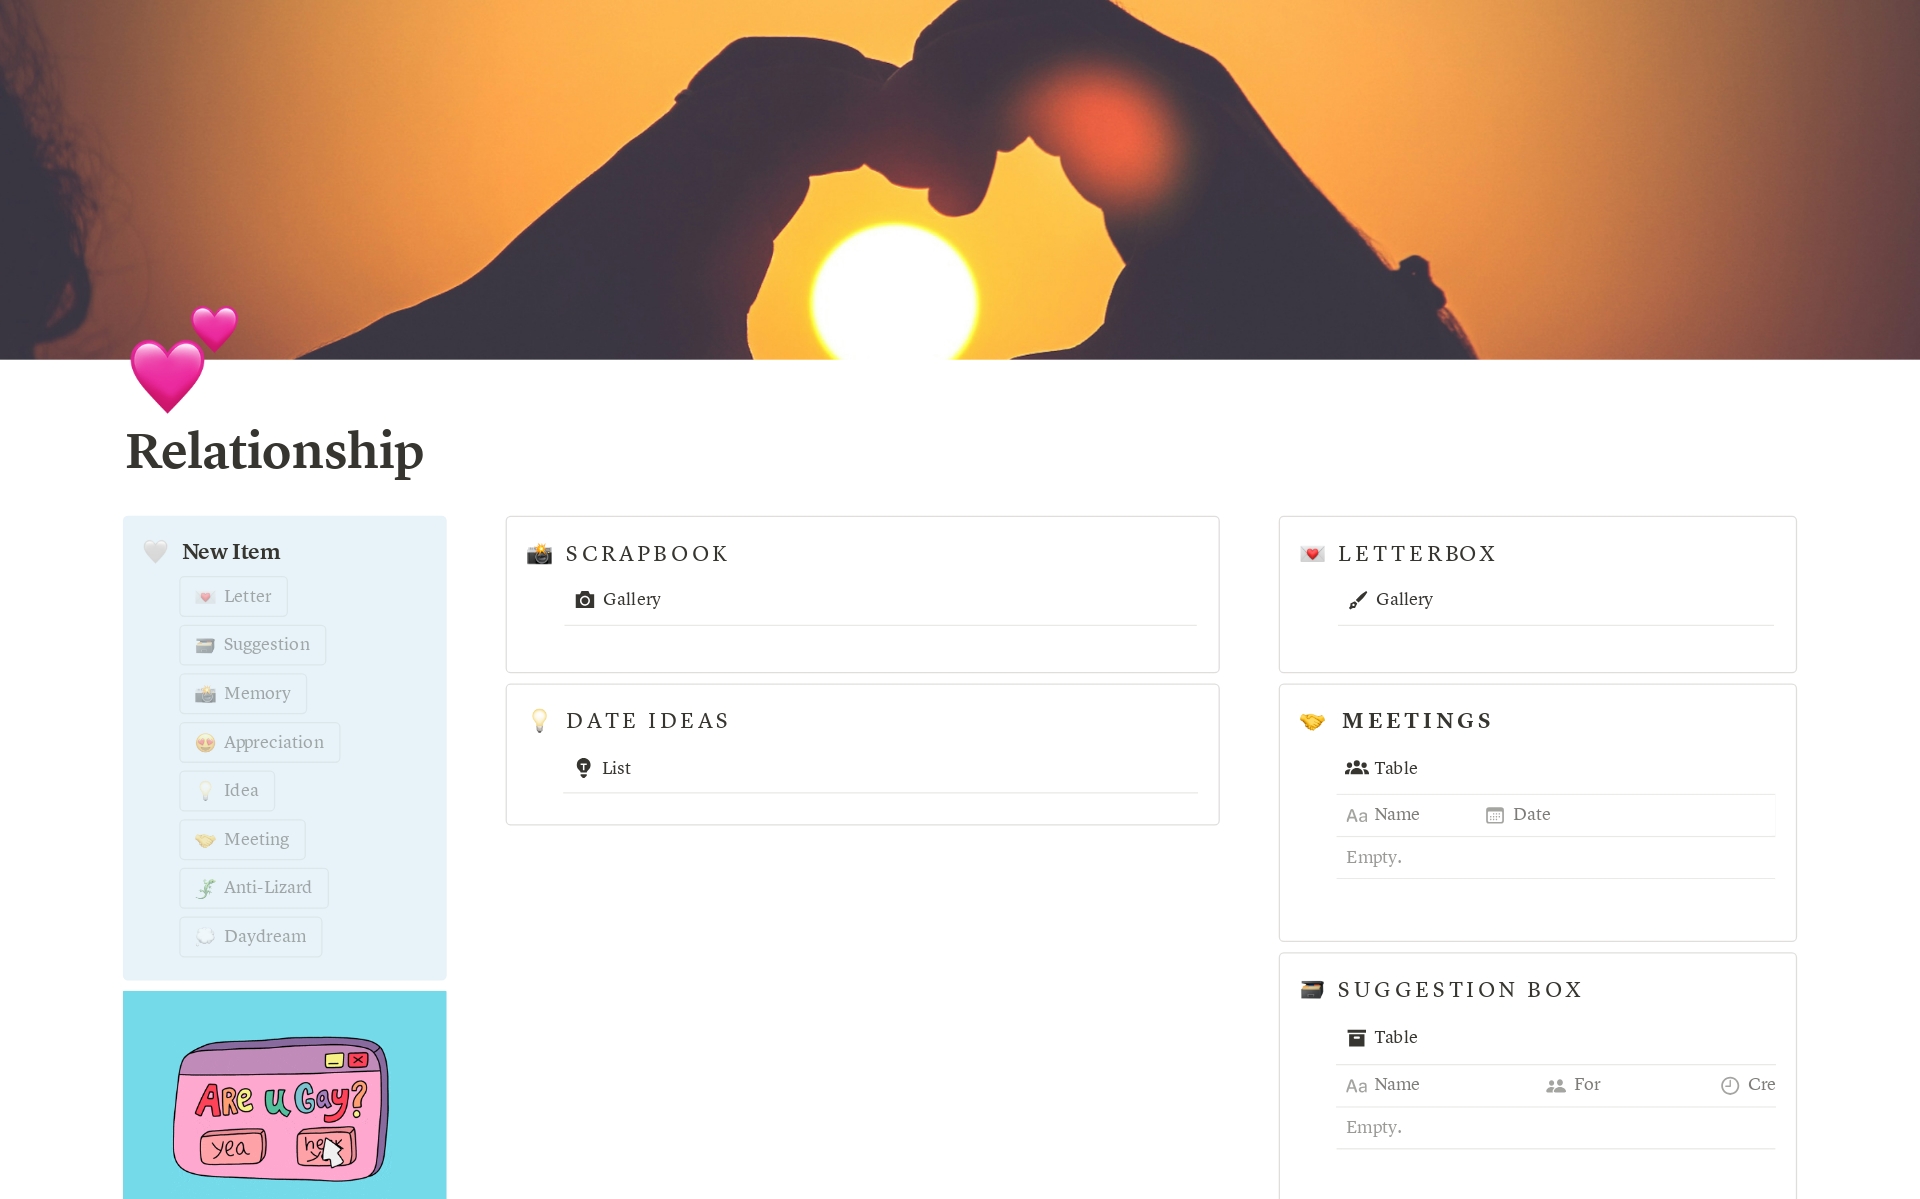 A central hub to record memories, plan dates, discussions and life events. Even send your partner letters! Perfect for LDR, polycules and the anxiously attached (me too, friend).